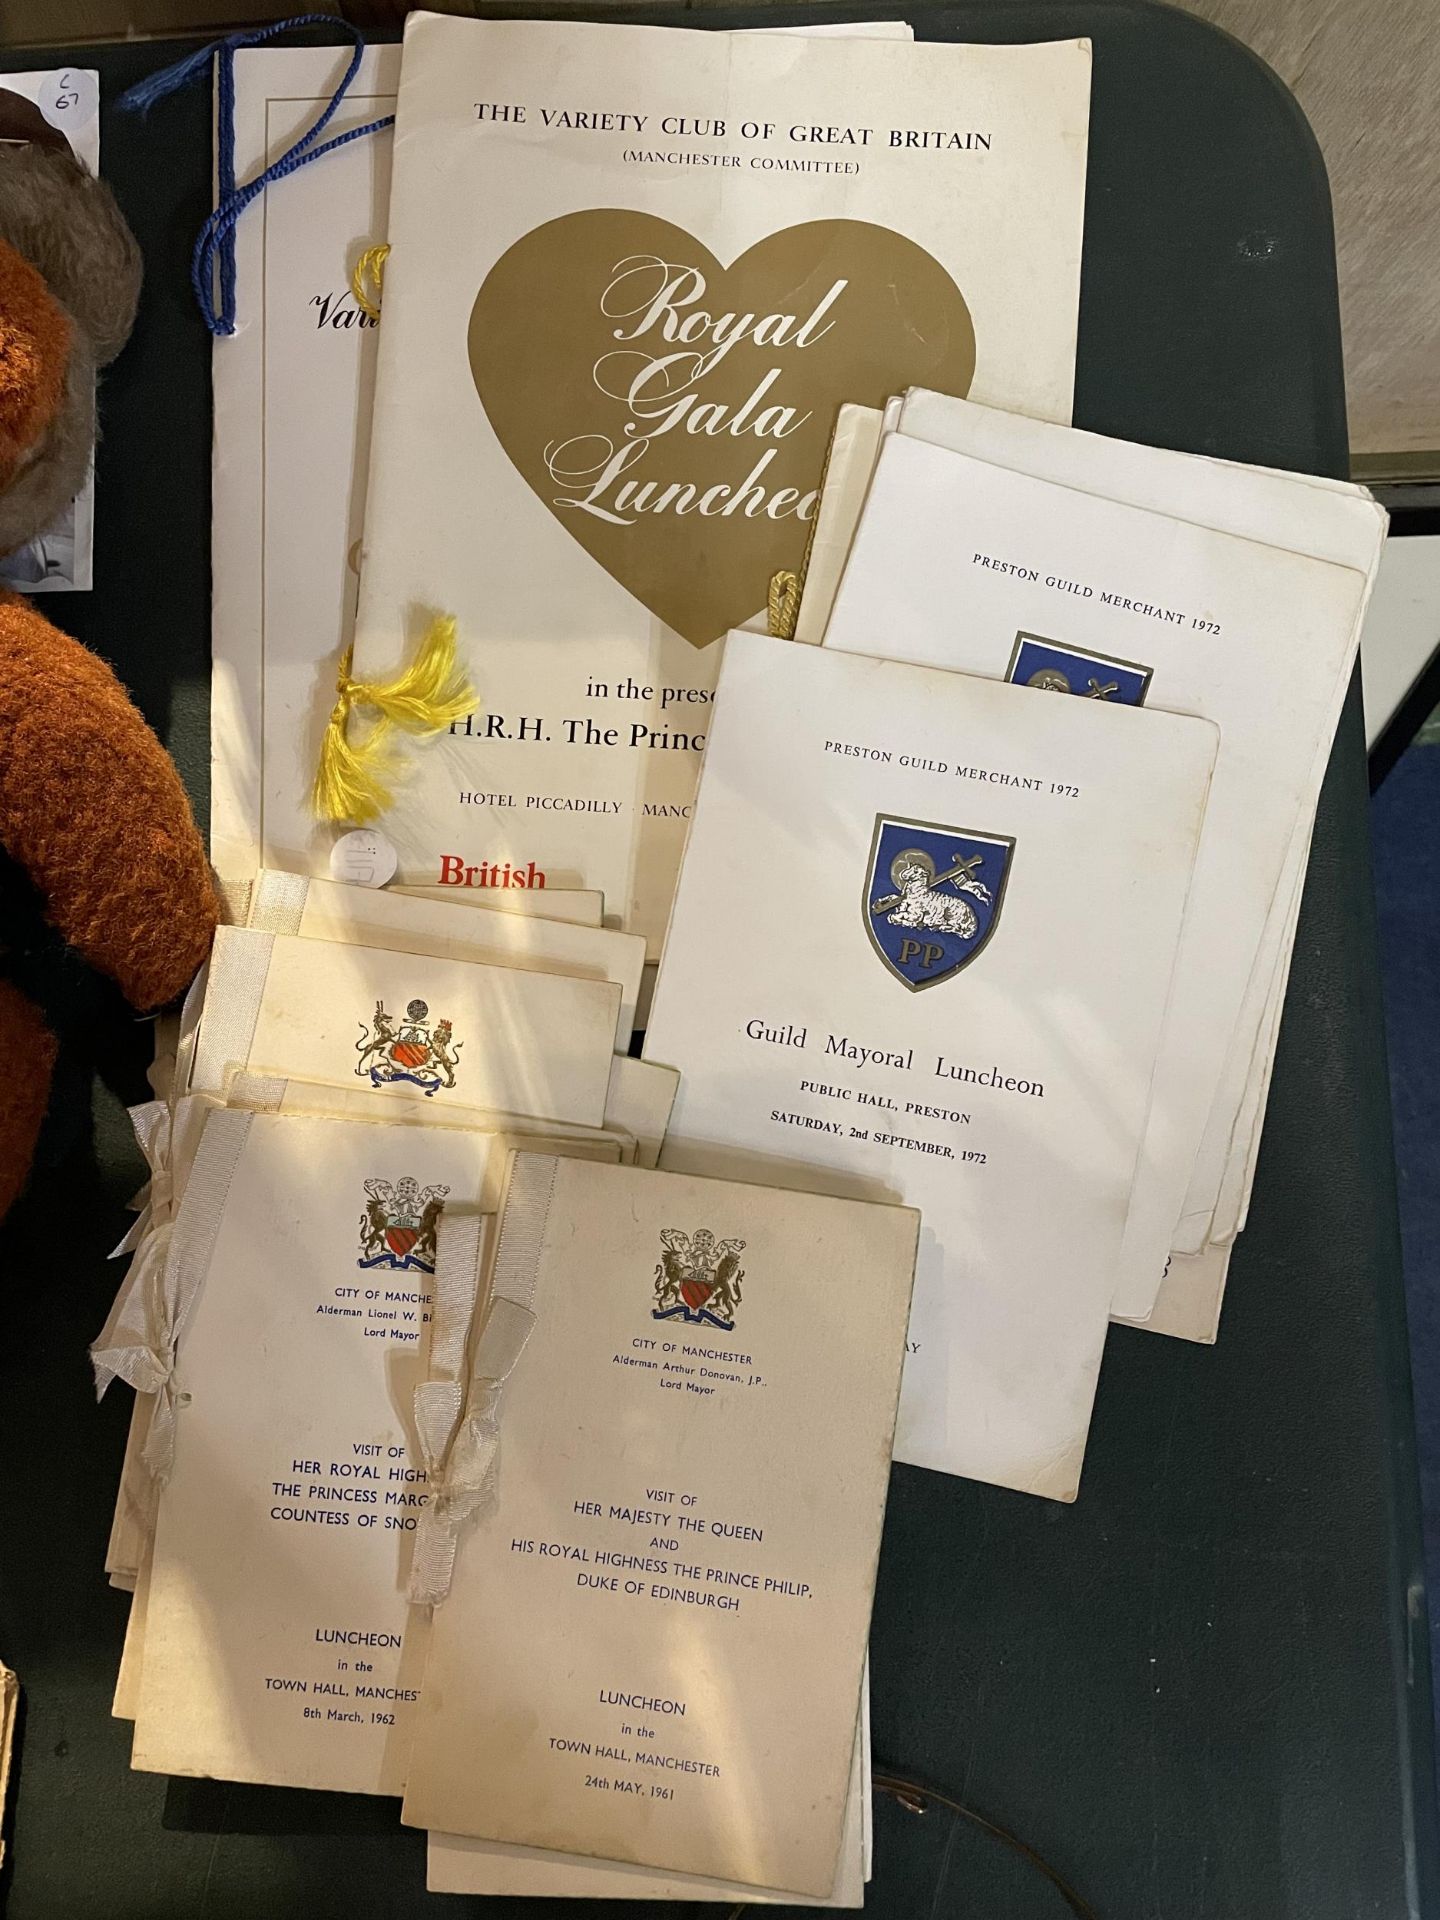 A COLLECTION OF LUNCHEON MENUS HOSTED BY THE CITY OF MANCHESTER ATTENDED BY ROYALTY, ALSO MENUS